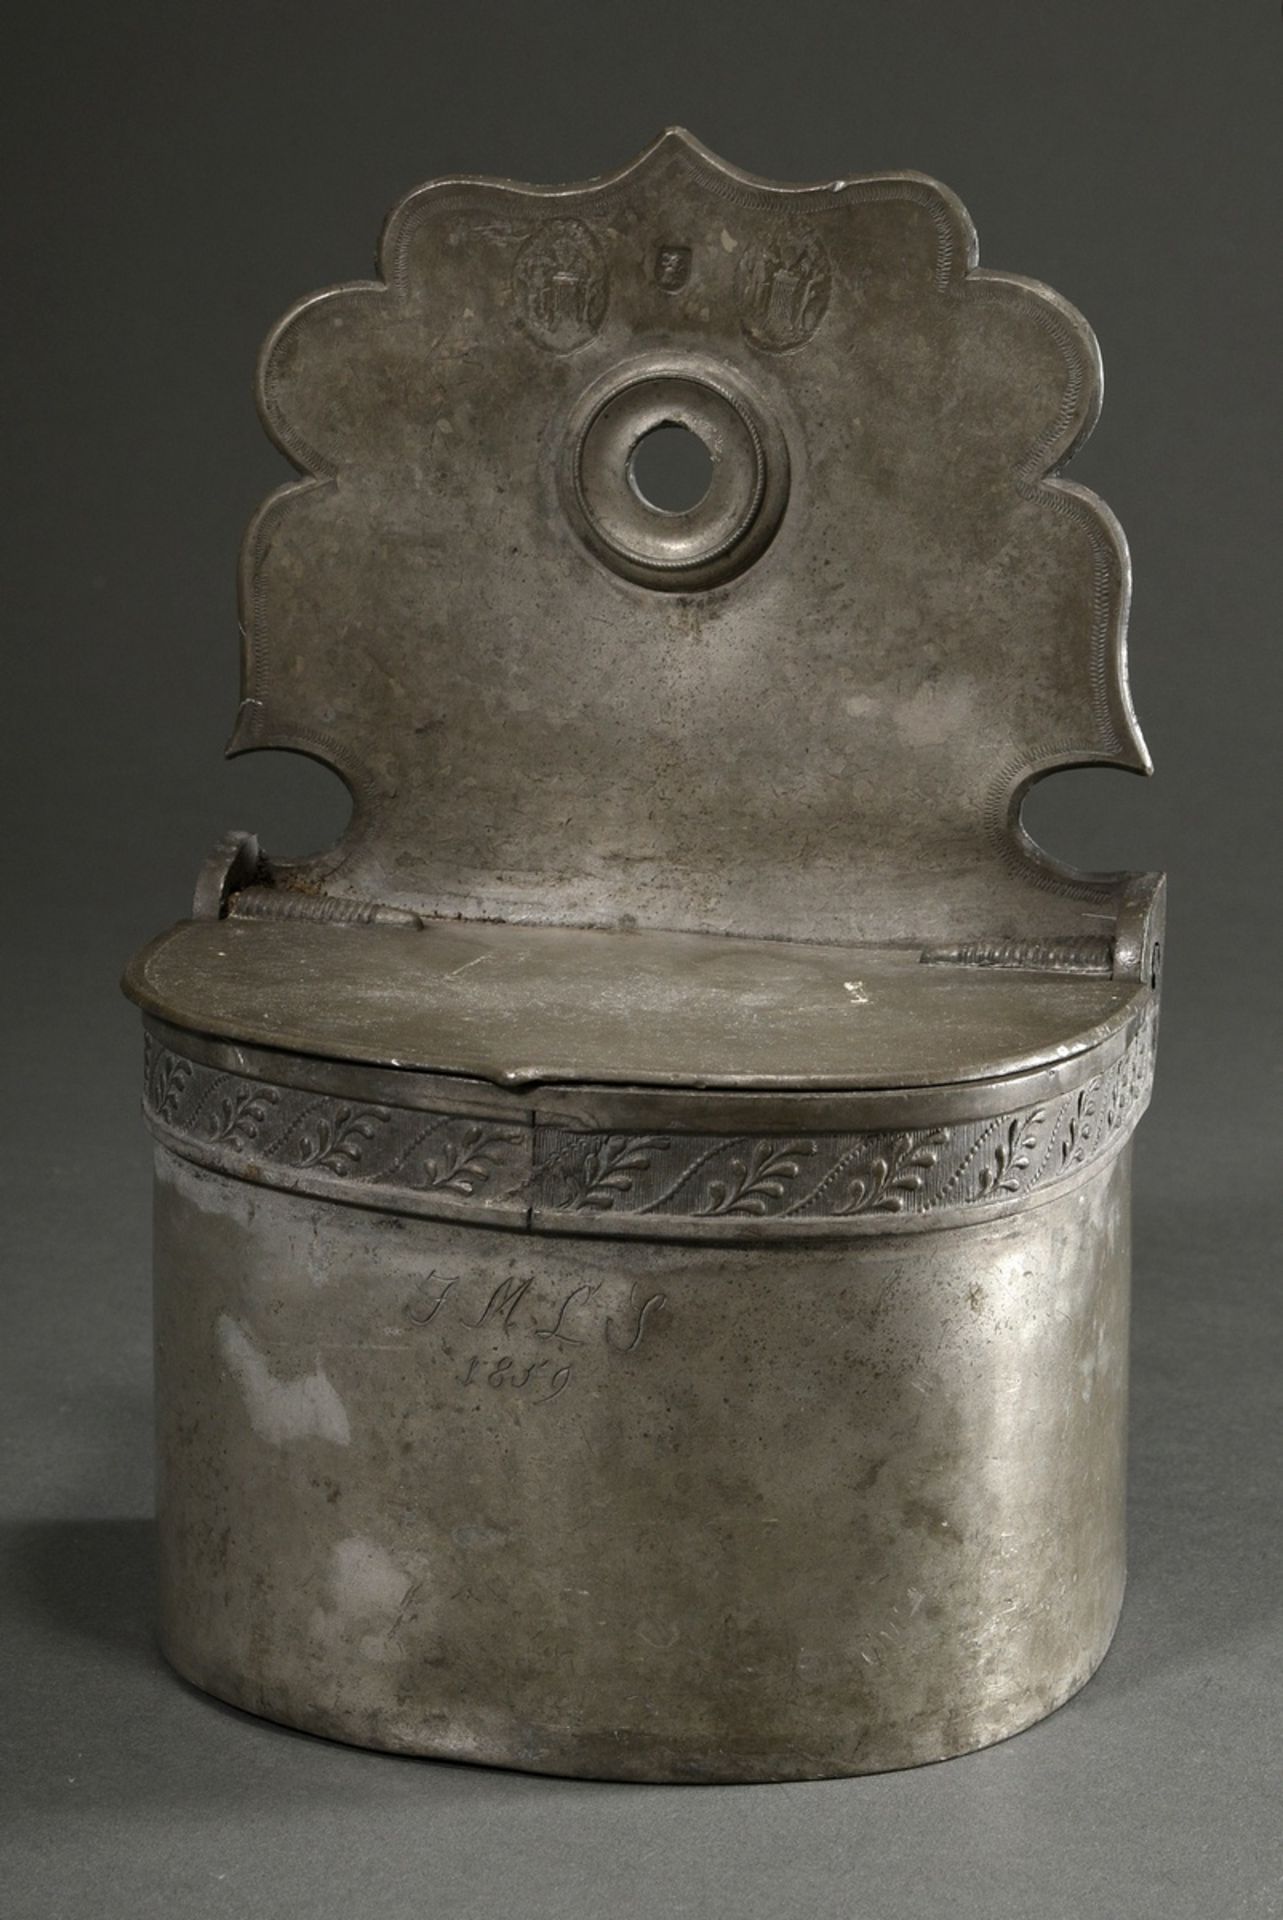 Pewter salt cellar with embossed floral frieze, engraved ‘JMLS 1859’ on the front, town mark probab - Image 2 of 7